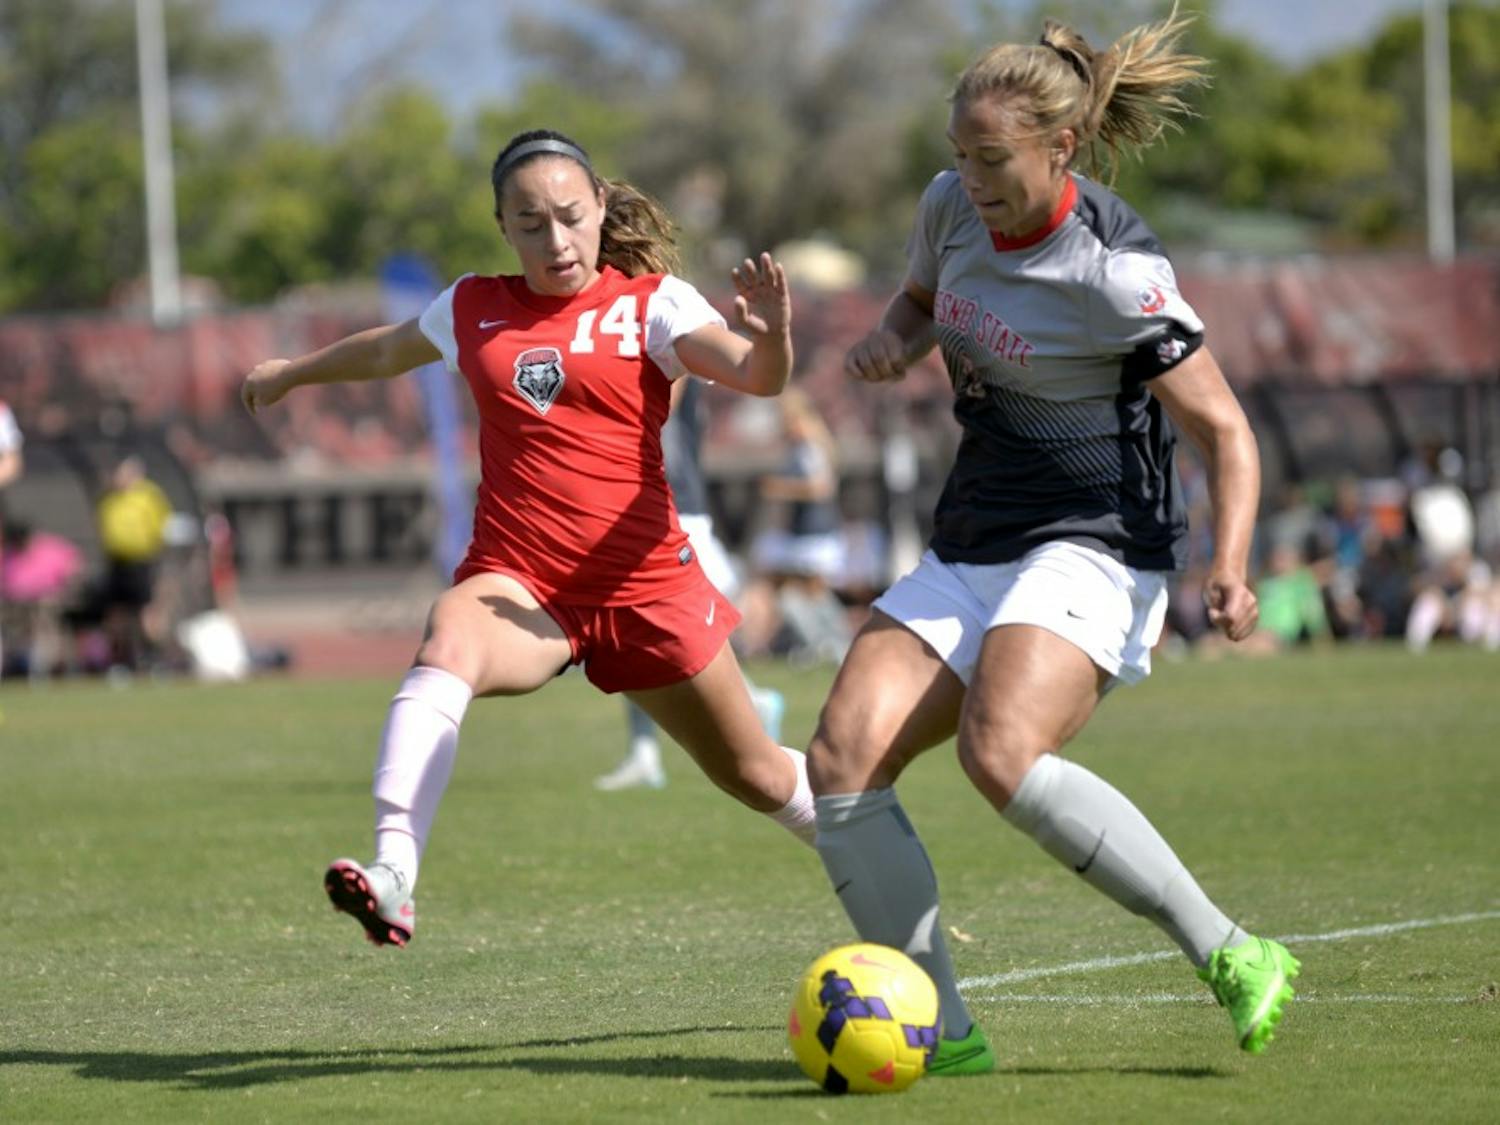 Midfielder Claire Lynch looks to make a play on the ball against Fresno States Fanny Johansson at the UNM Soccer Complex Sunday, Oct. 18, 2015. The Lobos play Colorado College this Friday. 